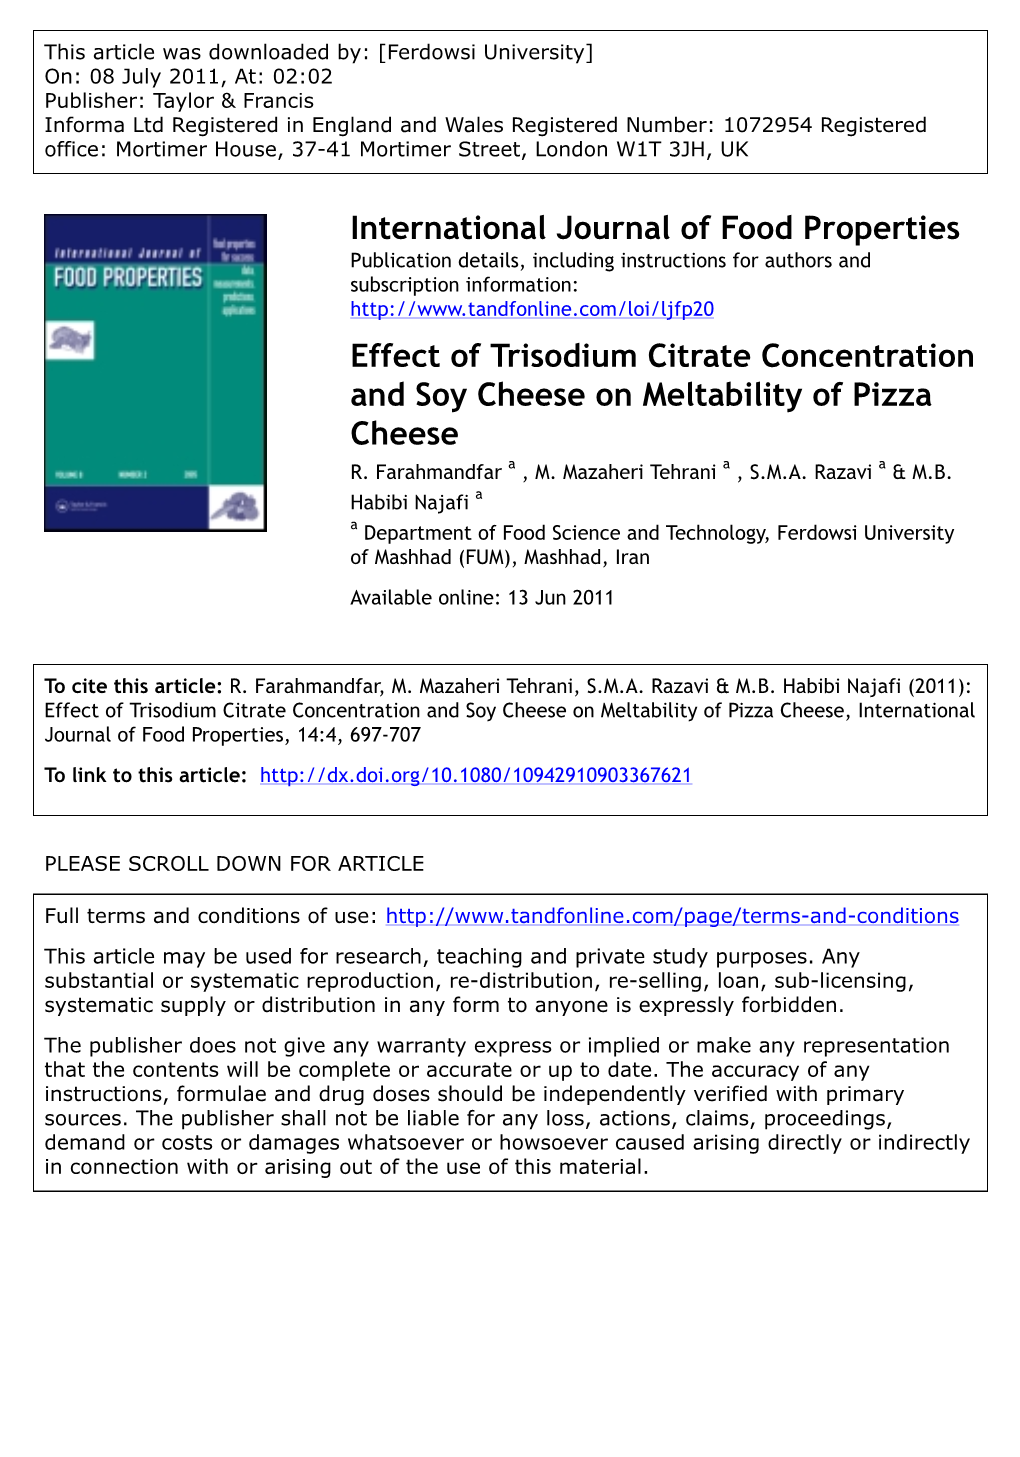 Effect of Trisodium Citrate Concentration and Soy Cheese on Meltability of Pizza Cheese R